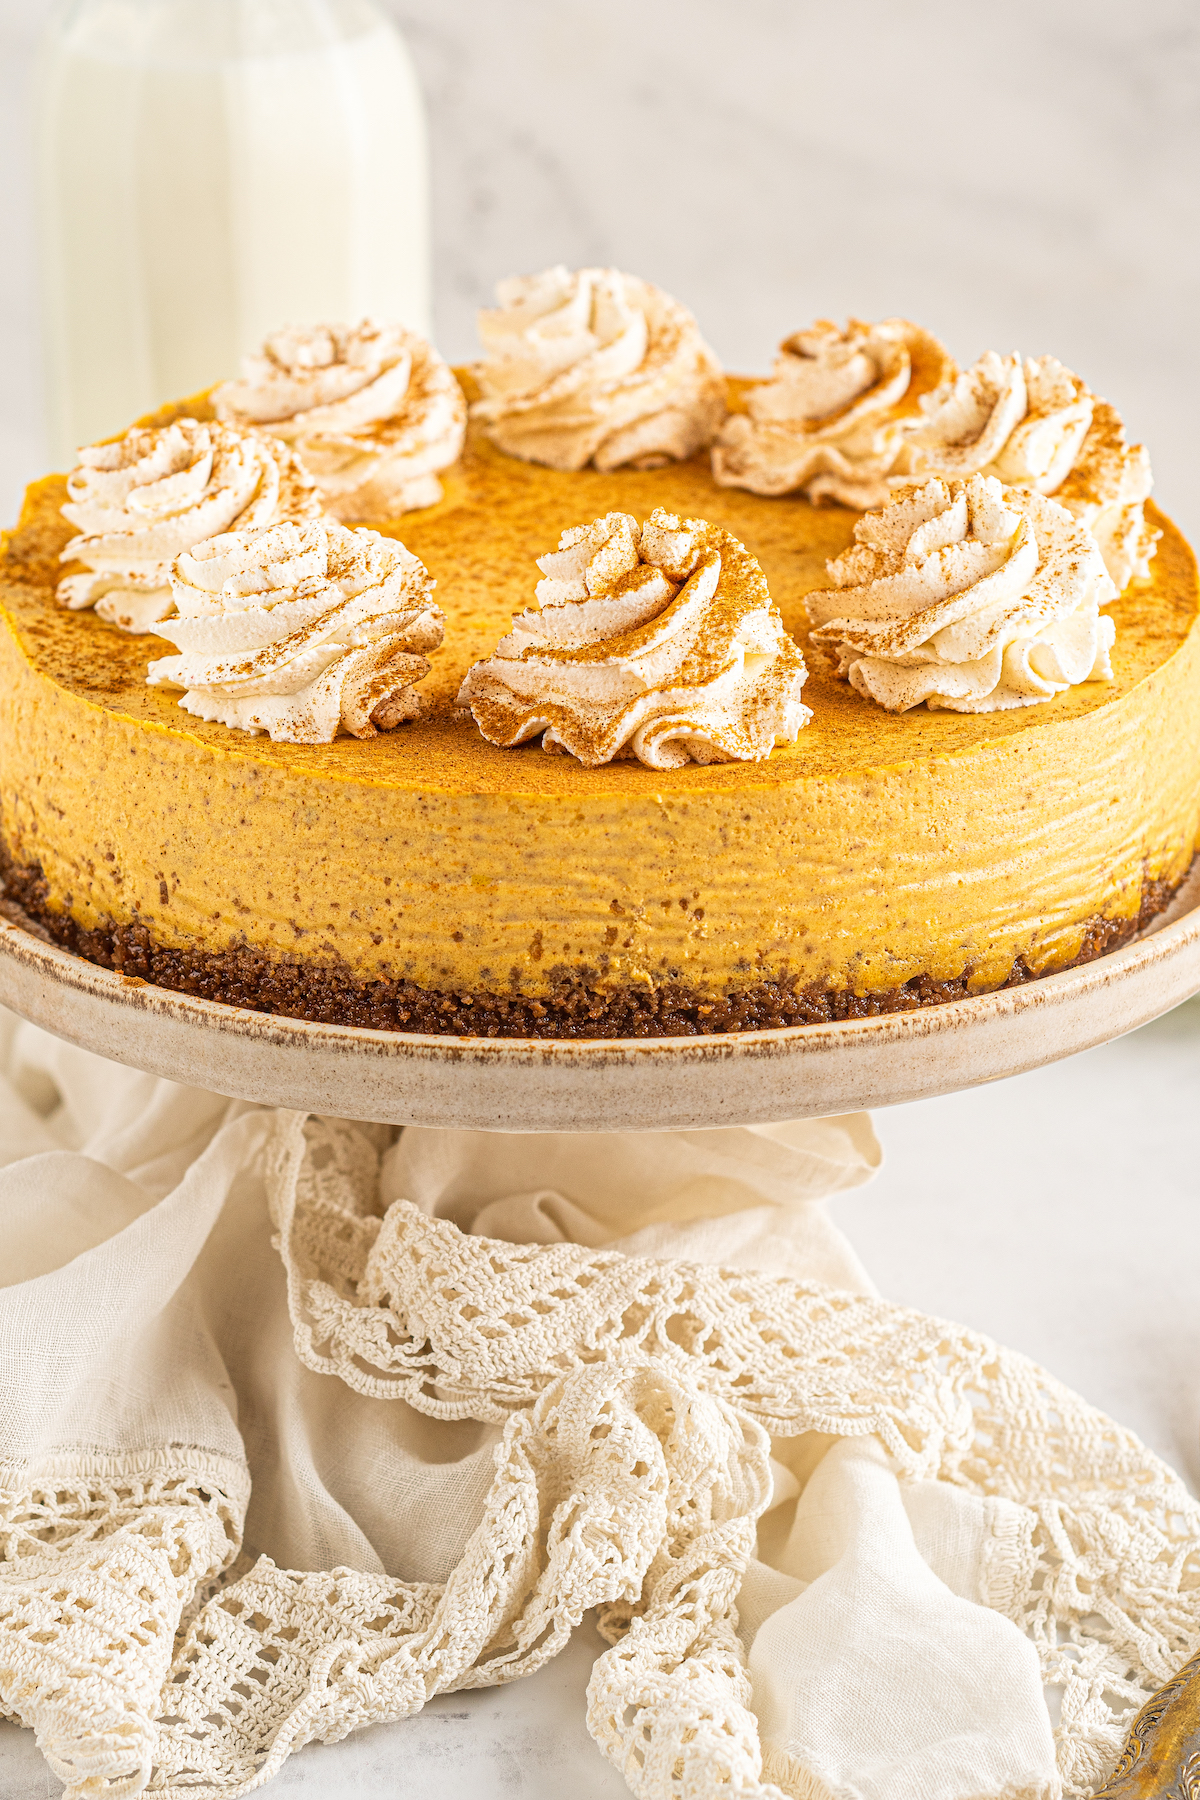 Pumpkin cheesecake garnished with piped whipped cream and ground cinnamon.